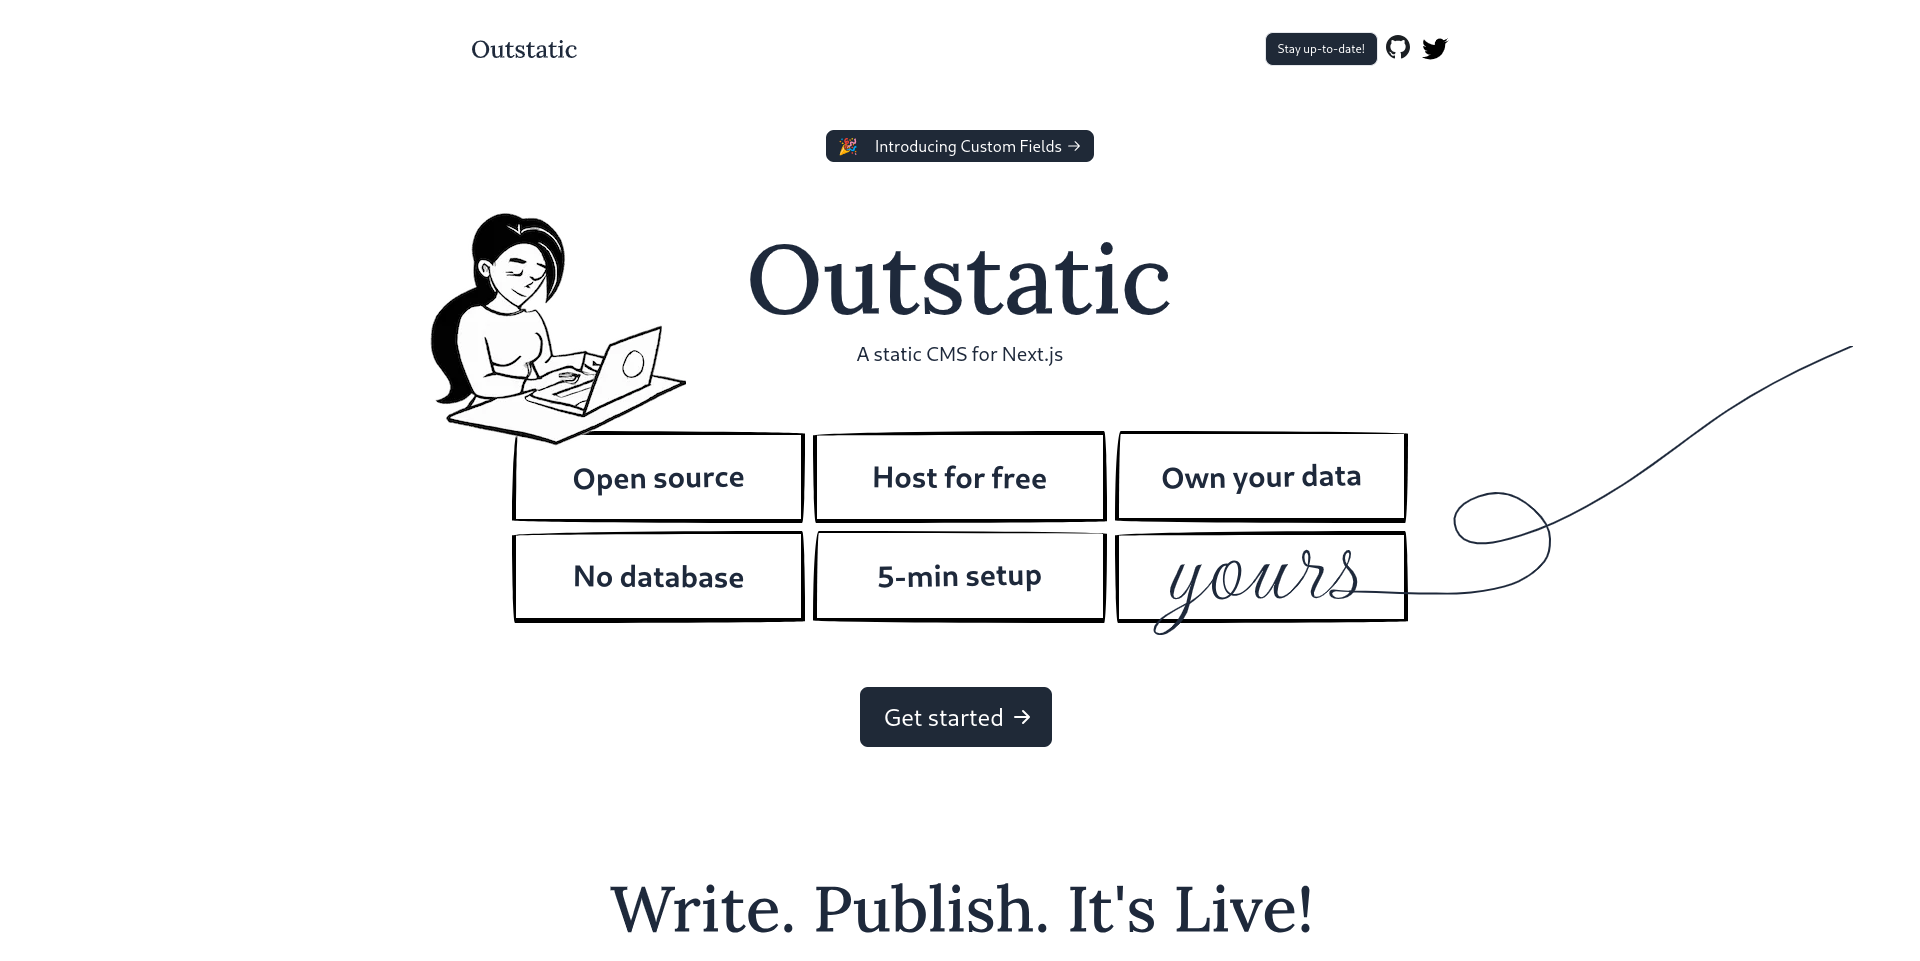 Outstatic CMS